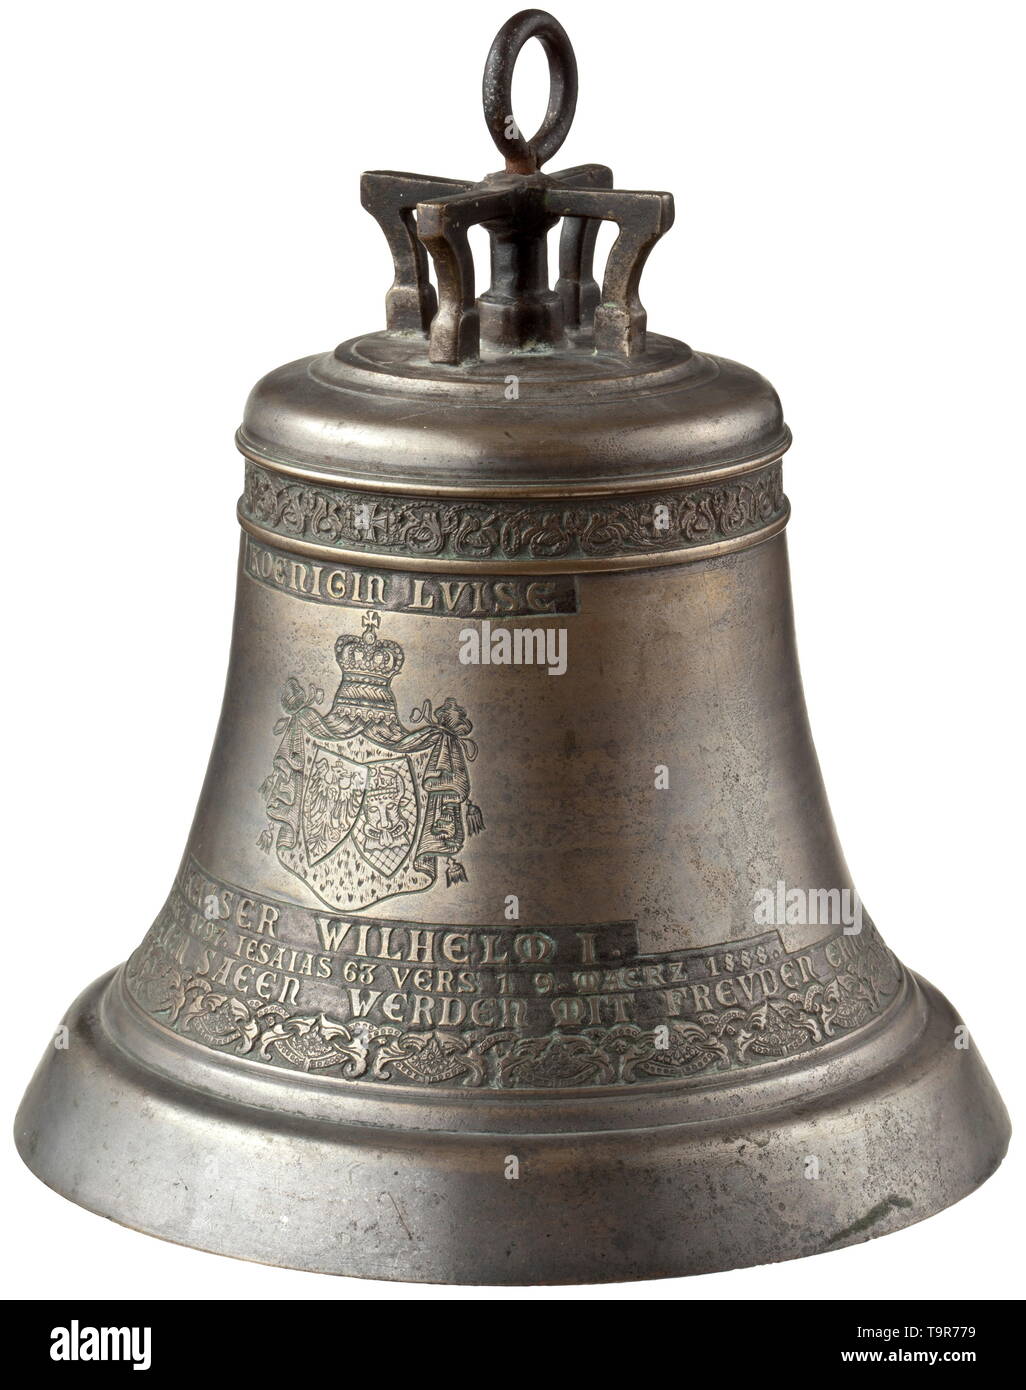 Emperor William I (1797 - 1888) - a model of the D bell of the Kaiser Wilhelm Memorial Church in Berlin, circa 1895 Silver-plated bronze, chiselled decoration on finely embossed ground. Classic bell shape with four bars, inscription 'Königin Luise - Kaiser Wilhelm I', alliance coat of arms of Prussia and Mecklenburg. The upper vine frieze interspersed with alternating depictions of the Iron Cross and the Order of Louise, the lower vine frieze with cornflower, the favourite flower of Queen Louise and Emperor William I. Of the five bells cast from , Additional-Rights-Clearance-Info-Not-Available Stock Photo